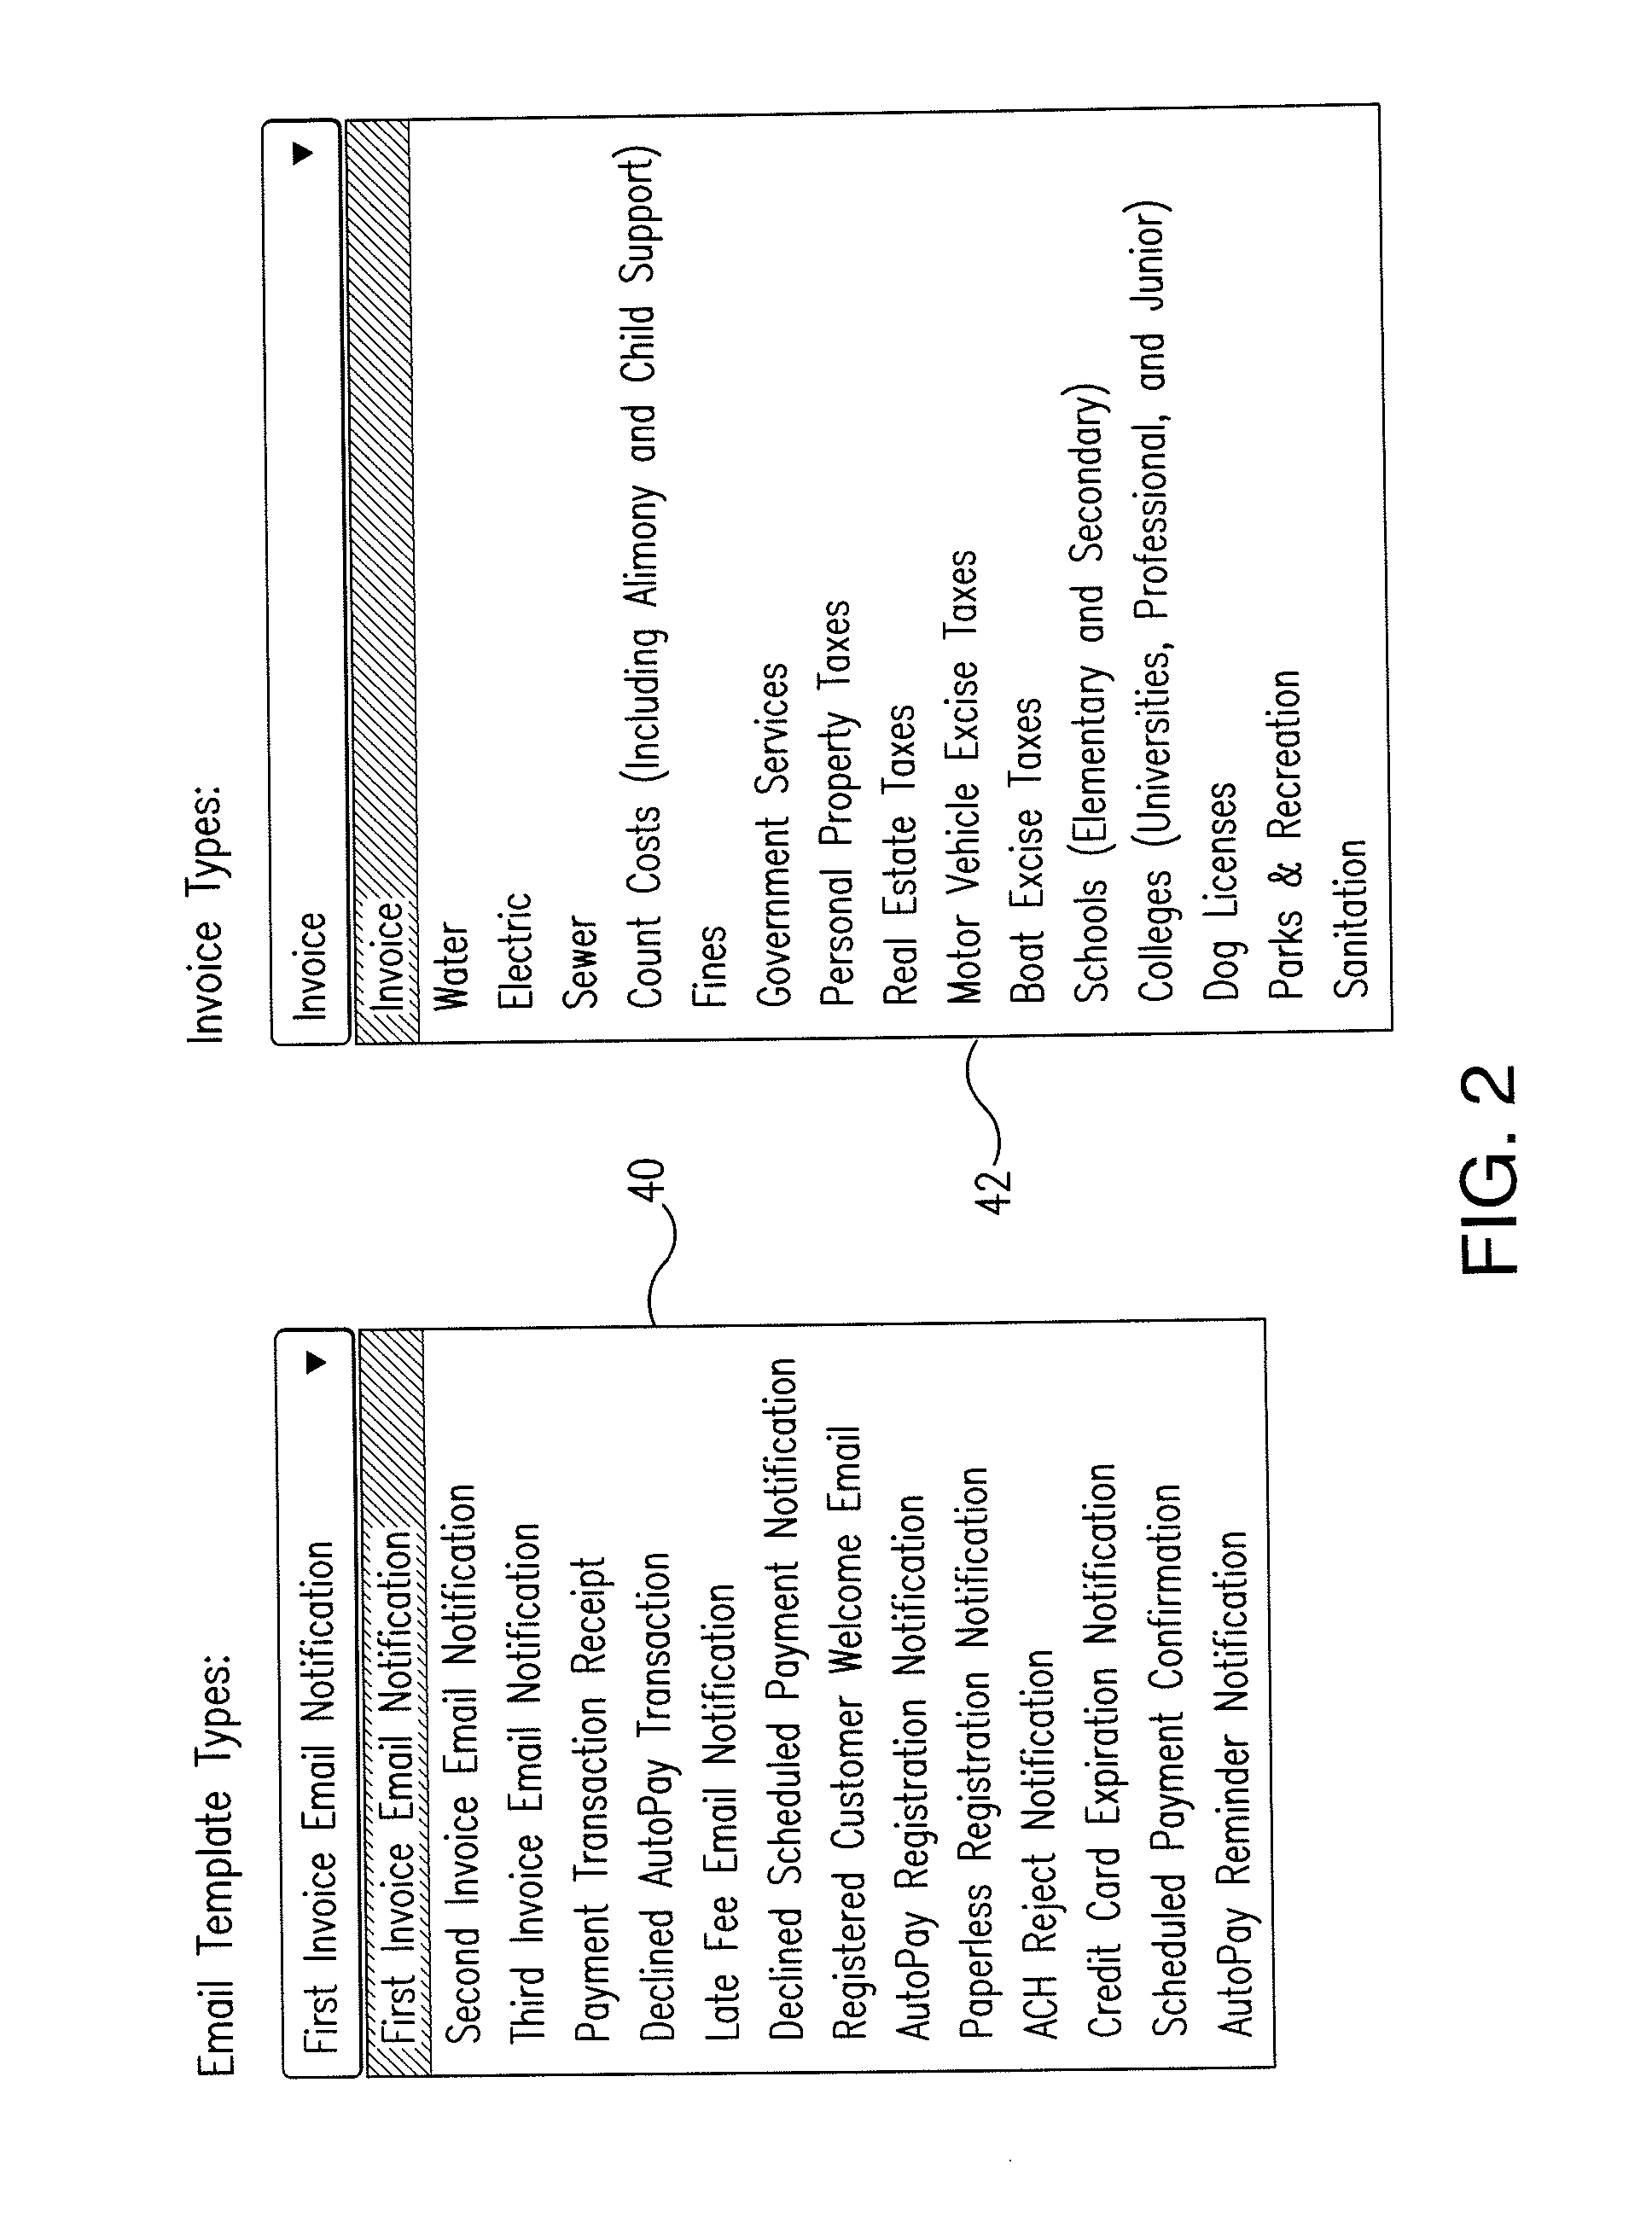 Electronic invoice presentation and payment system